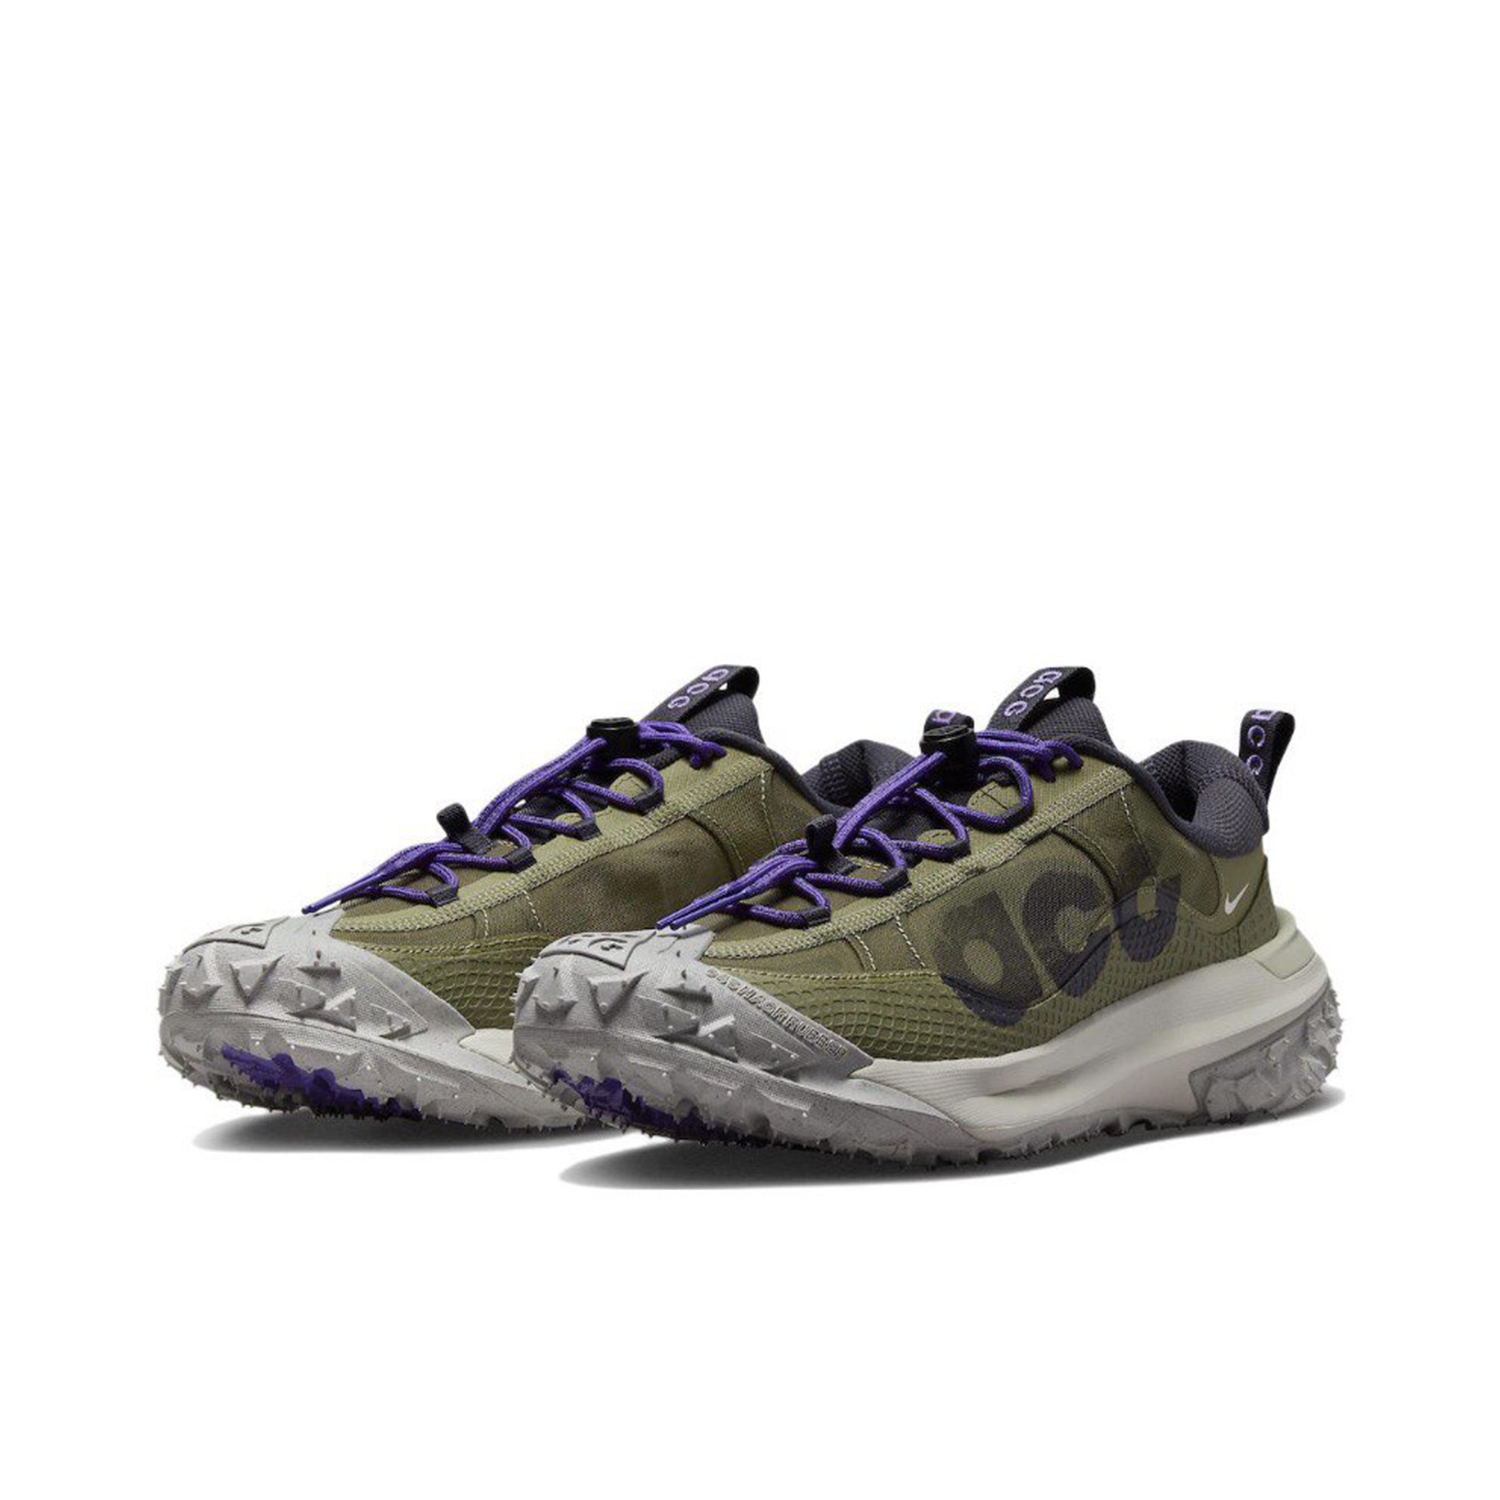 Nike ACG Mountain Fly 2 Low "Natural Olive" (DV7903-200)